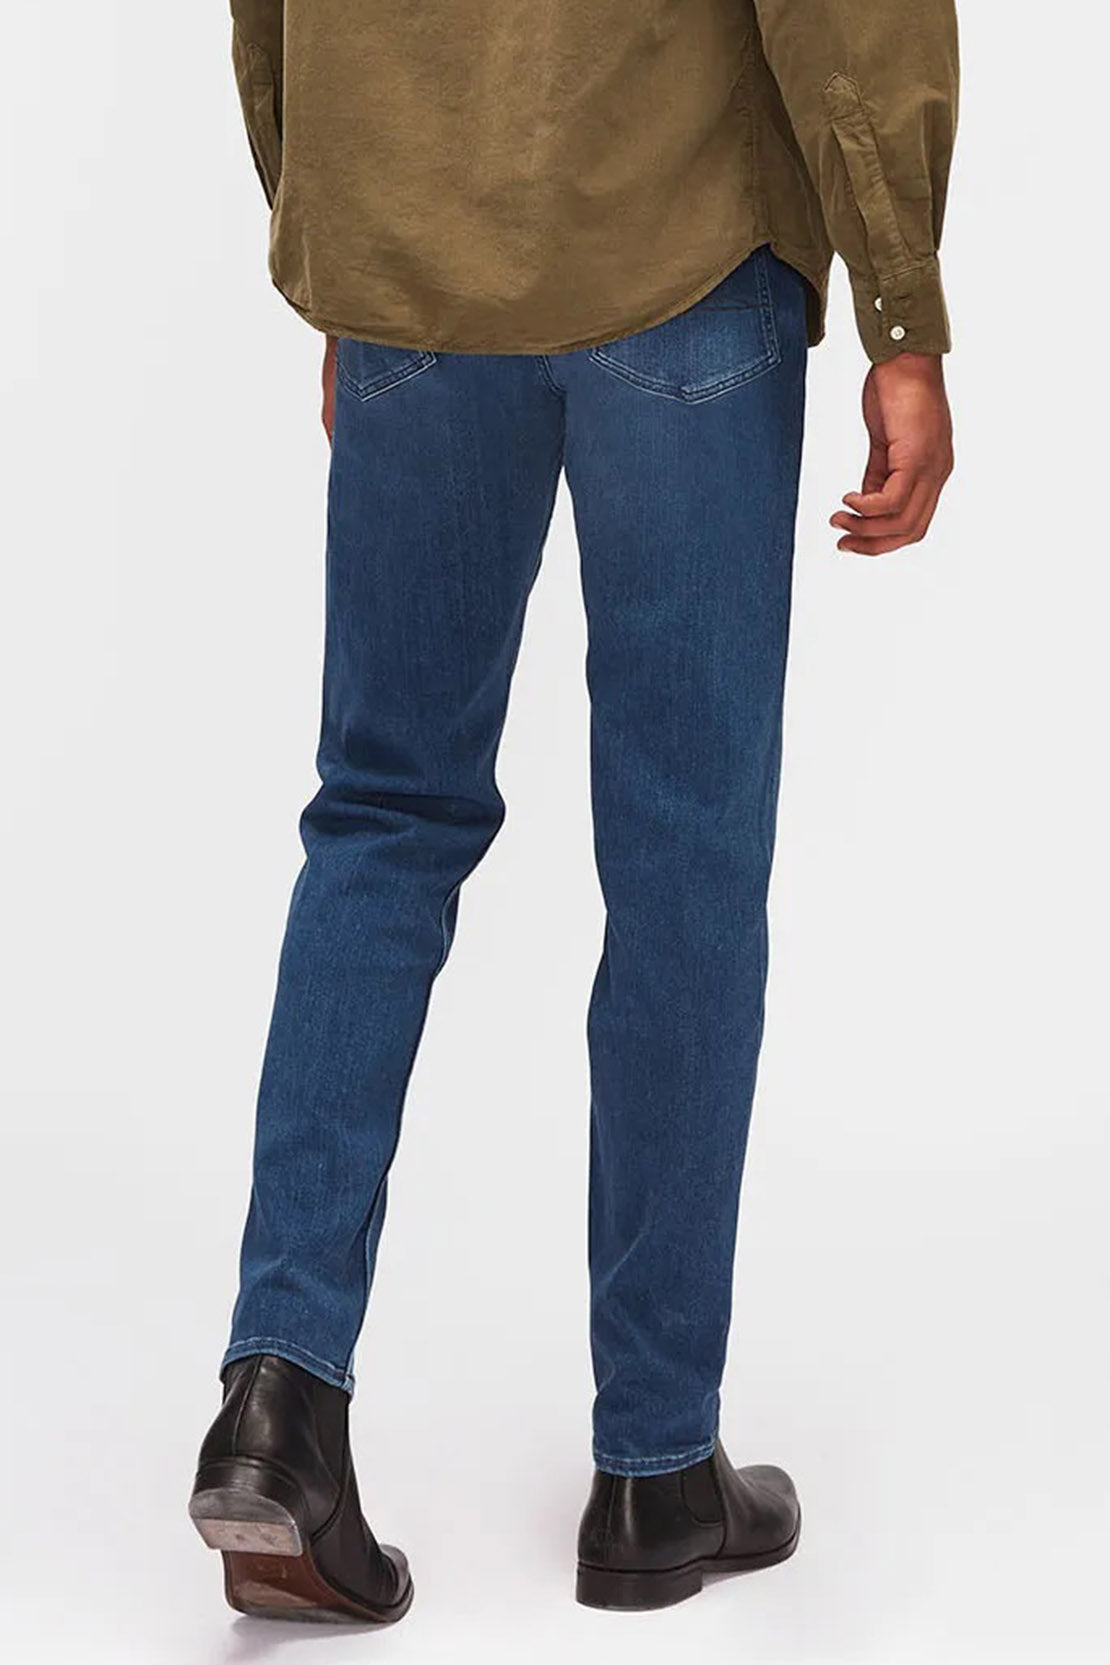 7 FOR ALL MANKIND - SLIMMY TAPERED Luxe Performance Plus Mid Blue Jeans KSMXA230BD